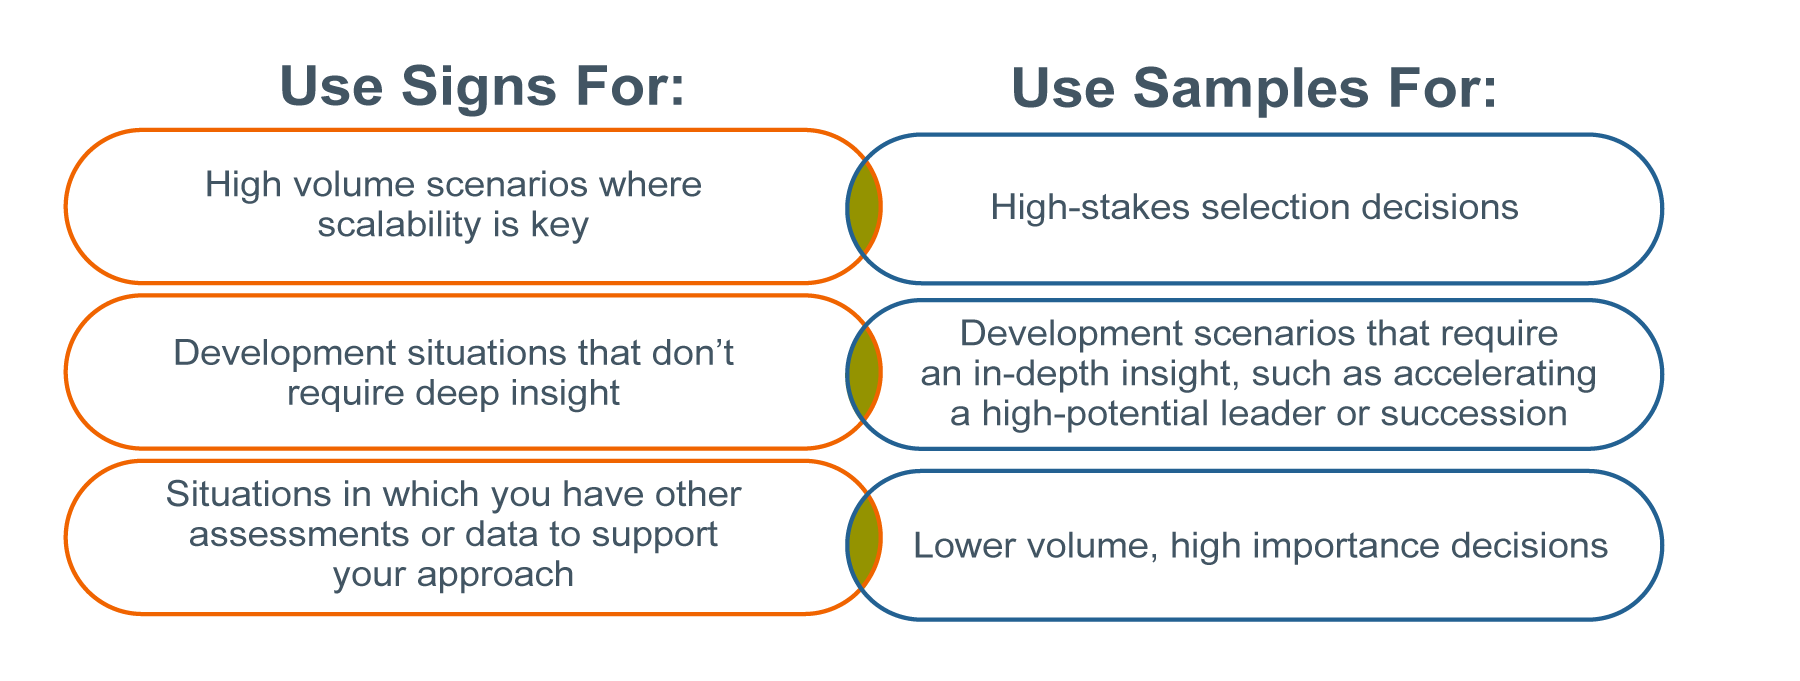 Summary graphic describing the different leadership assessment types. On the left, it says to use signs data for high volume scenarios where scalability is key; development situations that don't require deep insight, and situations in which you have other assessments or data to support your approach. On the right side, it says to use samples for high-stakes selection decisions; development scenarios that require an in-depth insight, such as accelerating a high-potential leader or succession; and lower volume, high importance decisions.